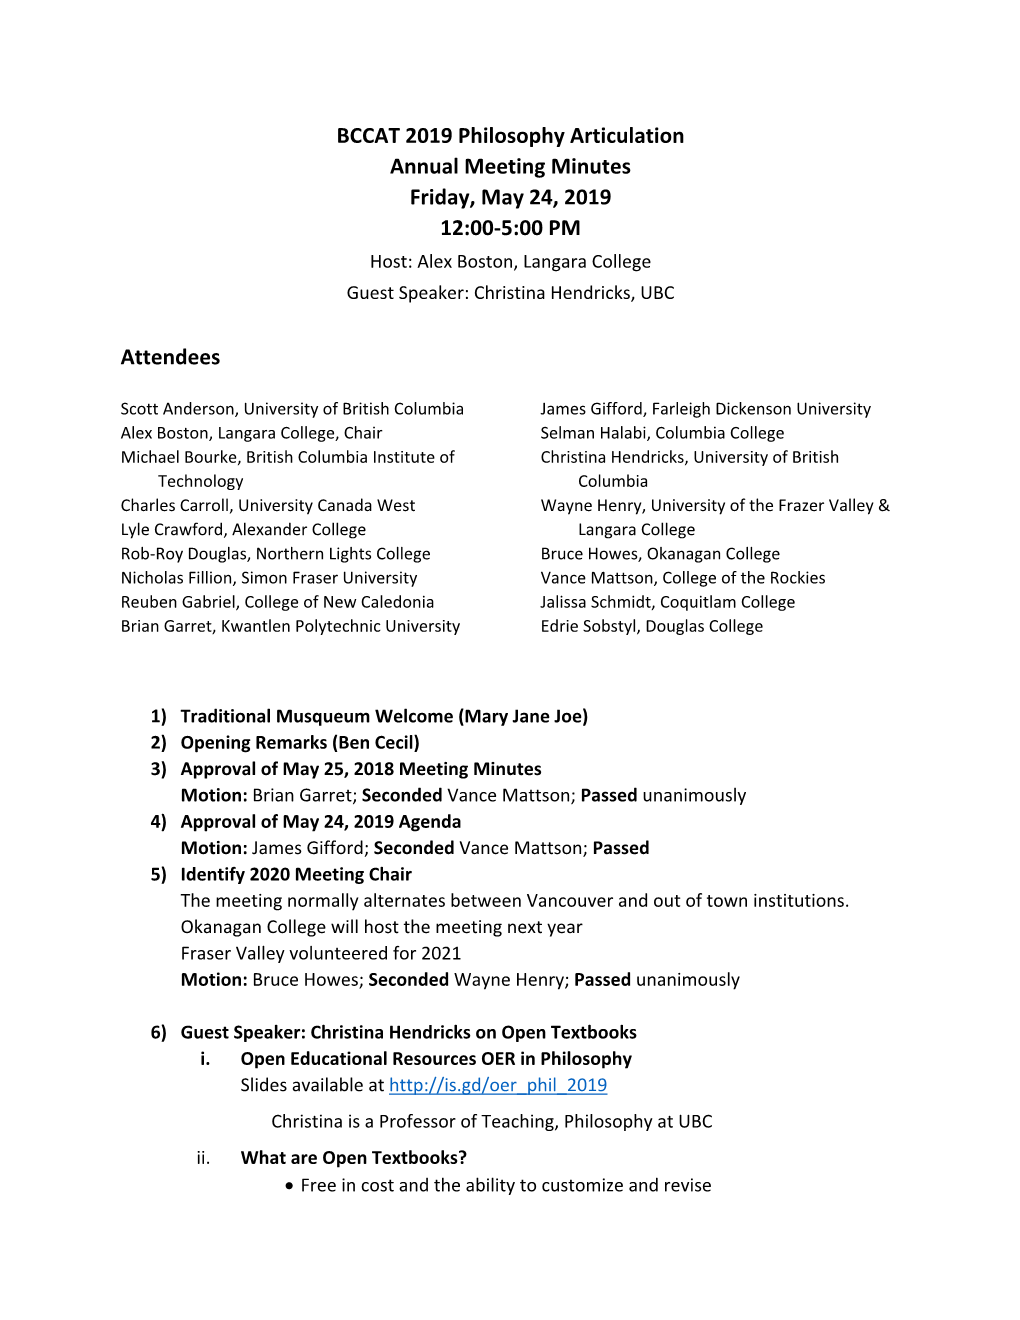 BCCAT 2019 Philosophy Articulation Annual Meeting Minutes Friday